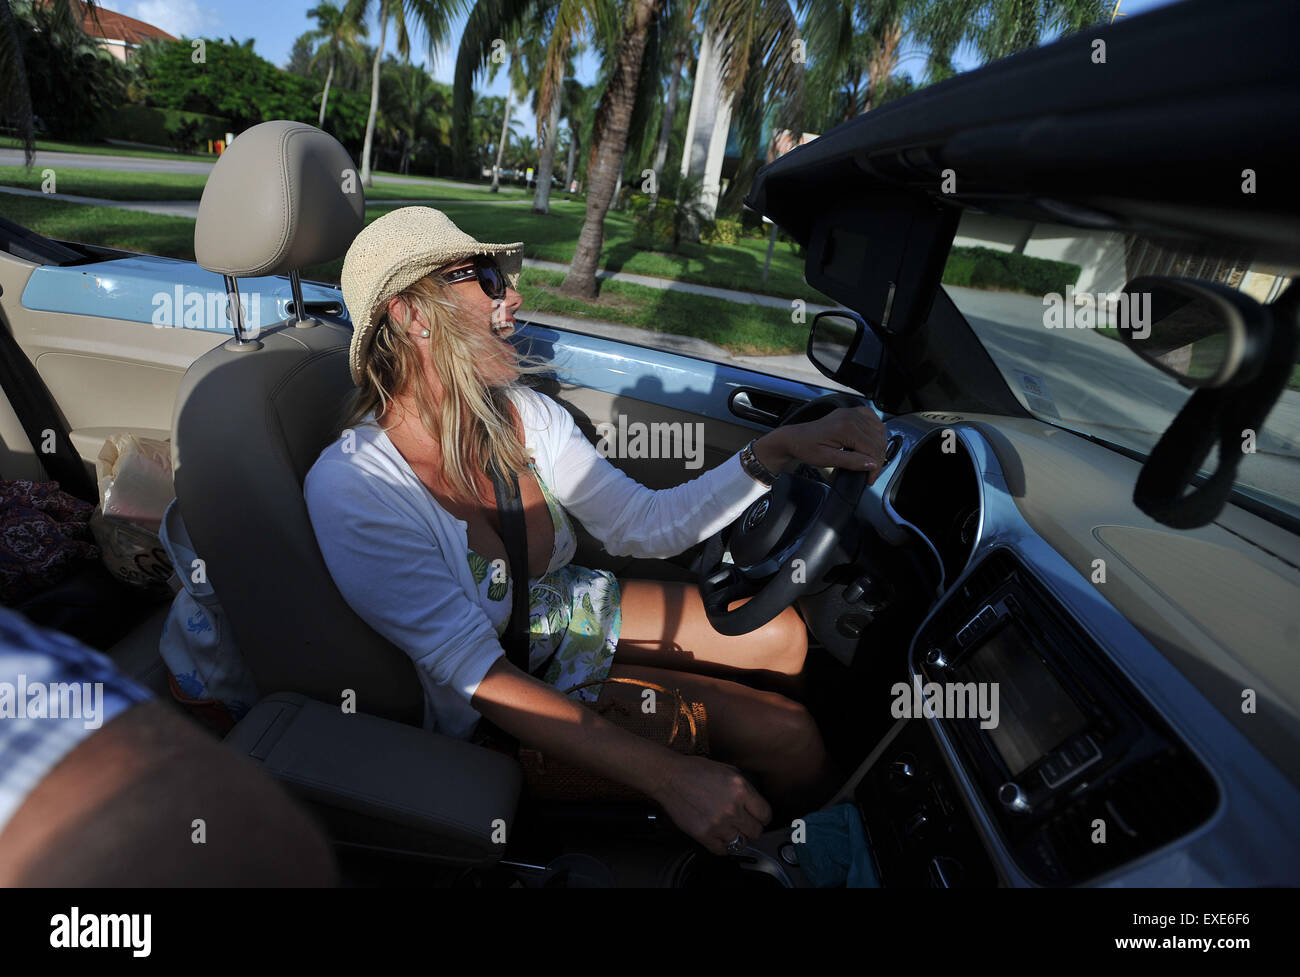 Woman enjoys singing in a convertable car in sun lifestyle Stock Photo